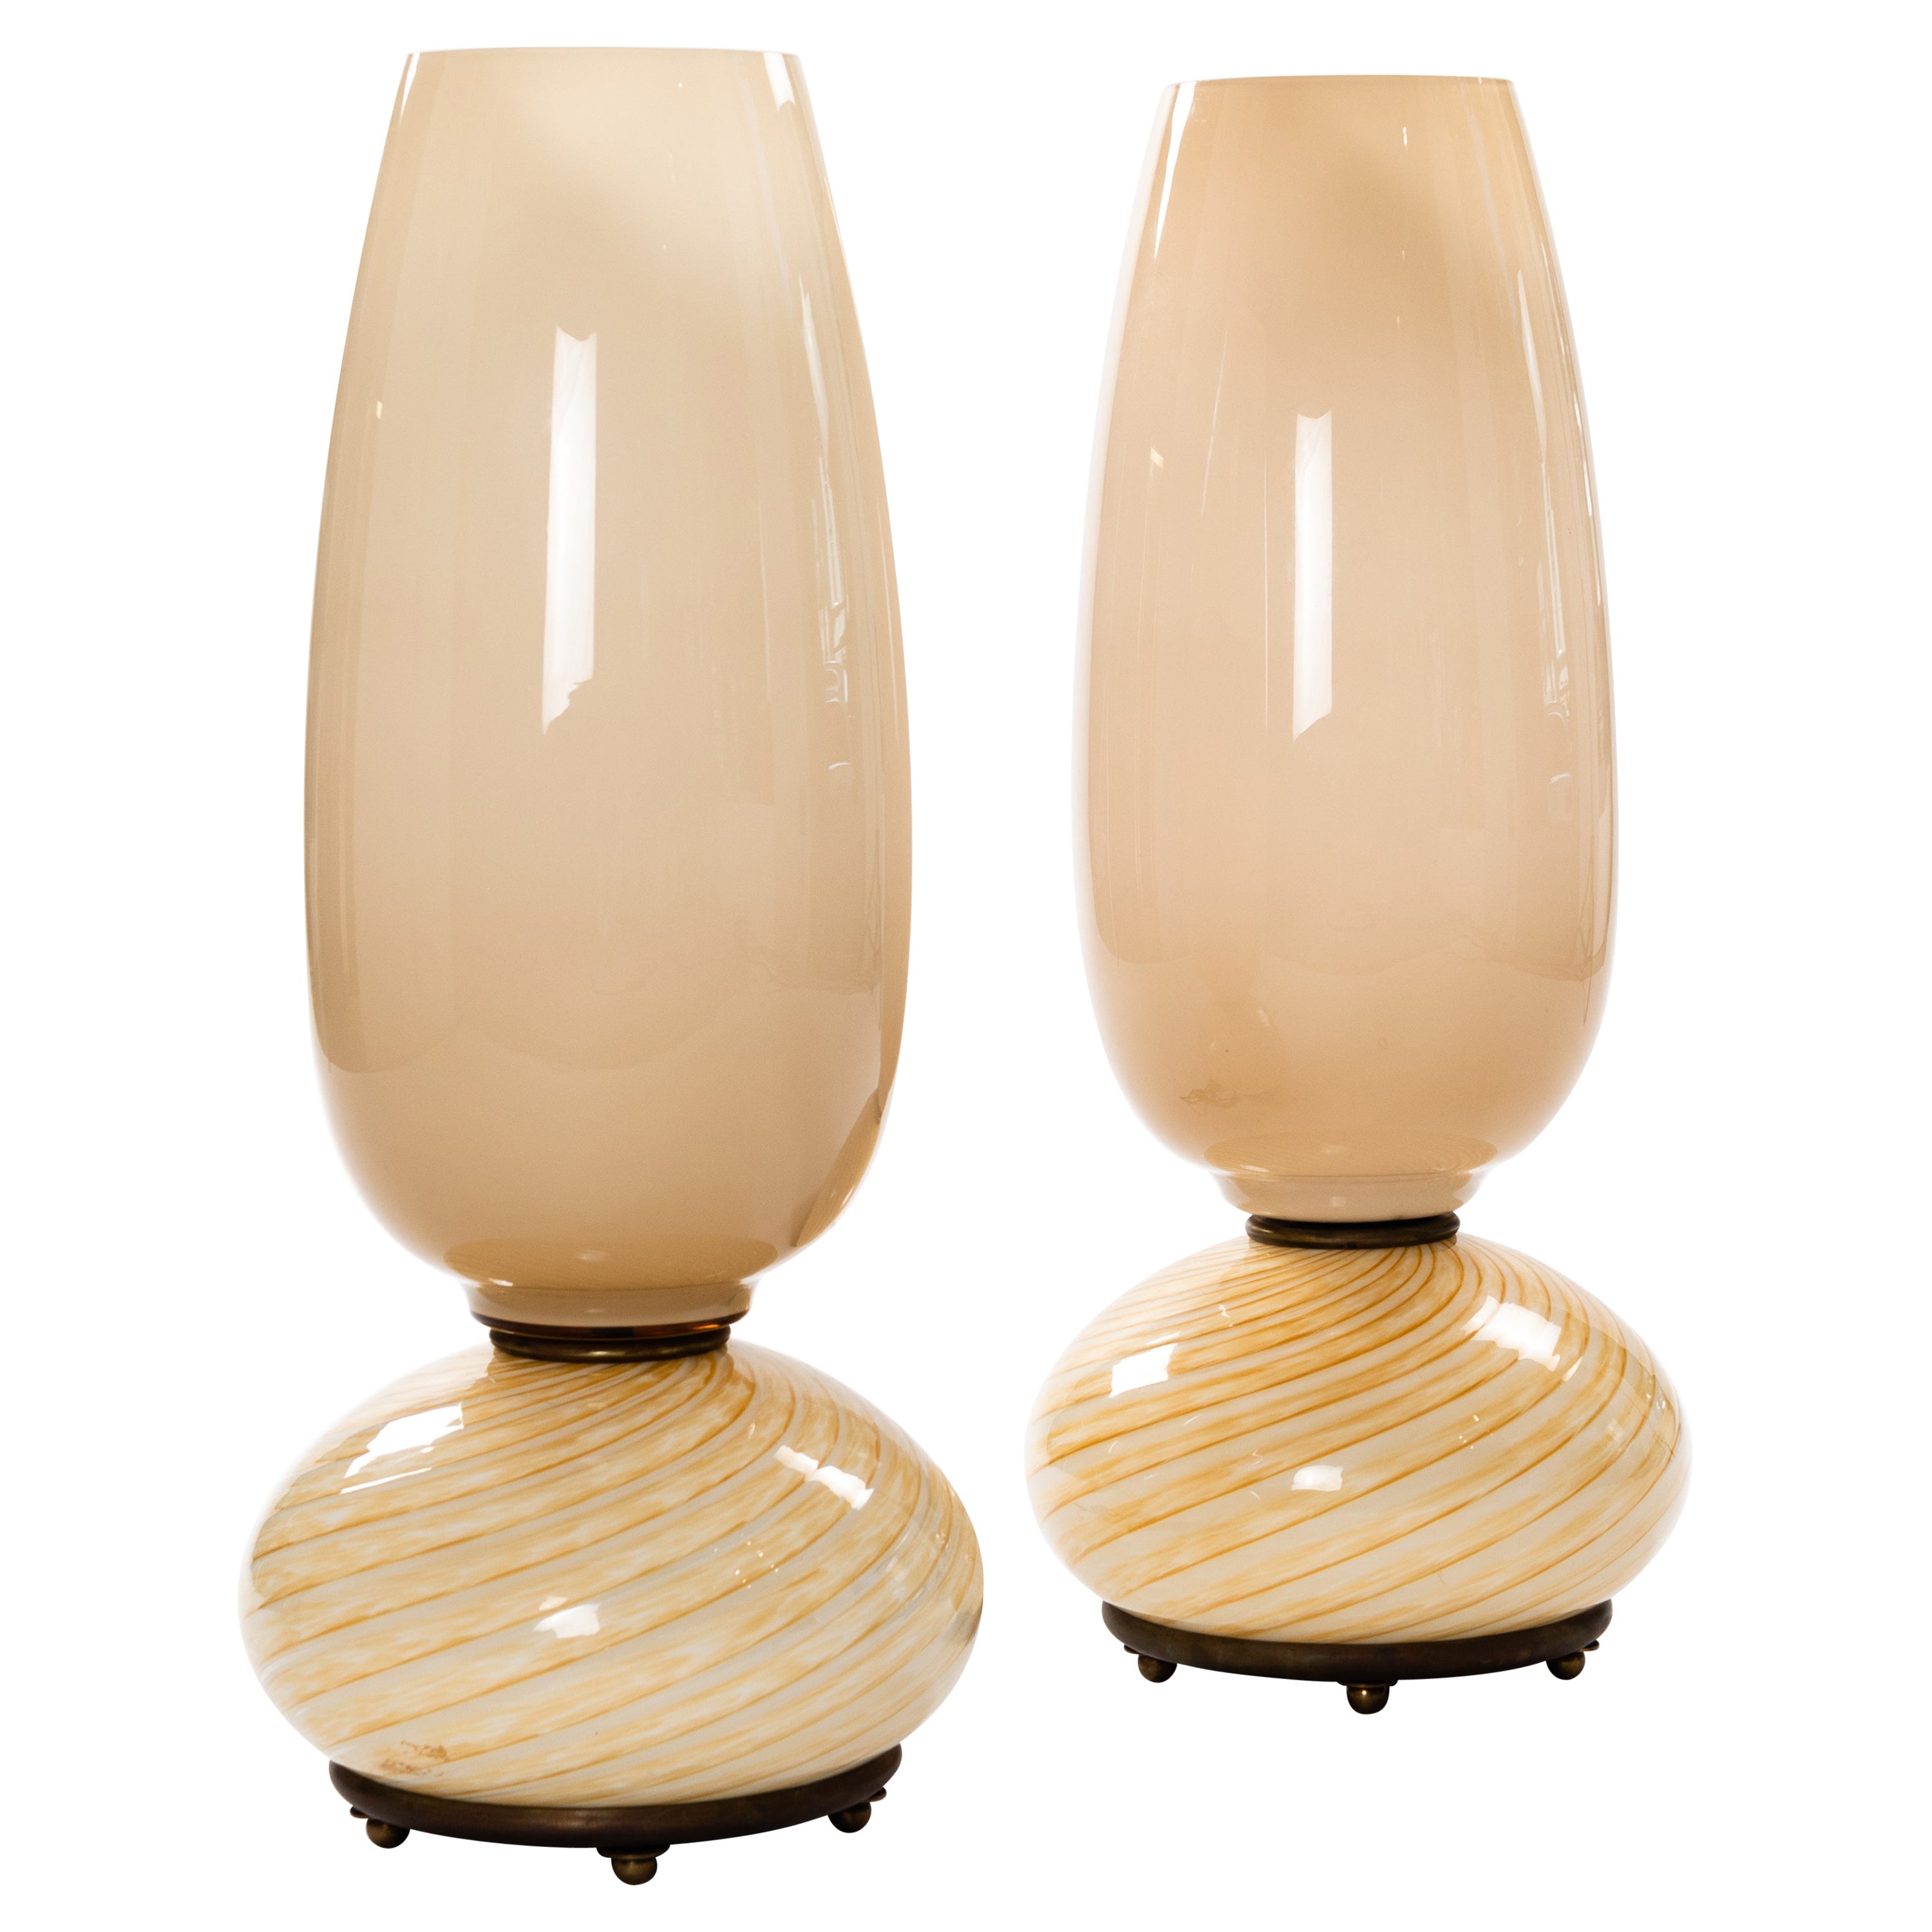 Pair of Mid-Century Italian Murano Glass Table Lamps by Venini 1970s For Sale